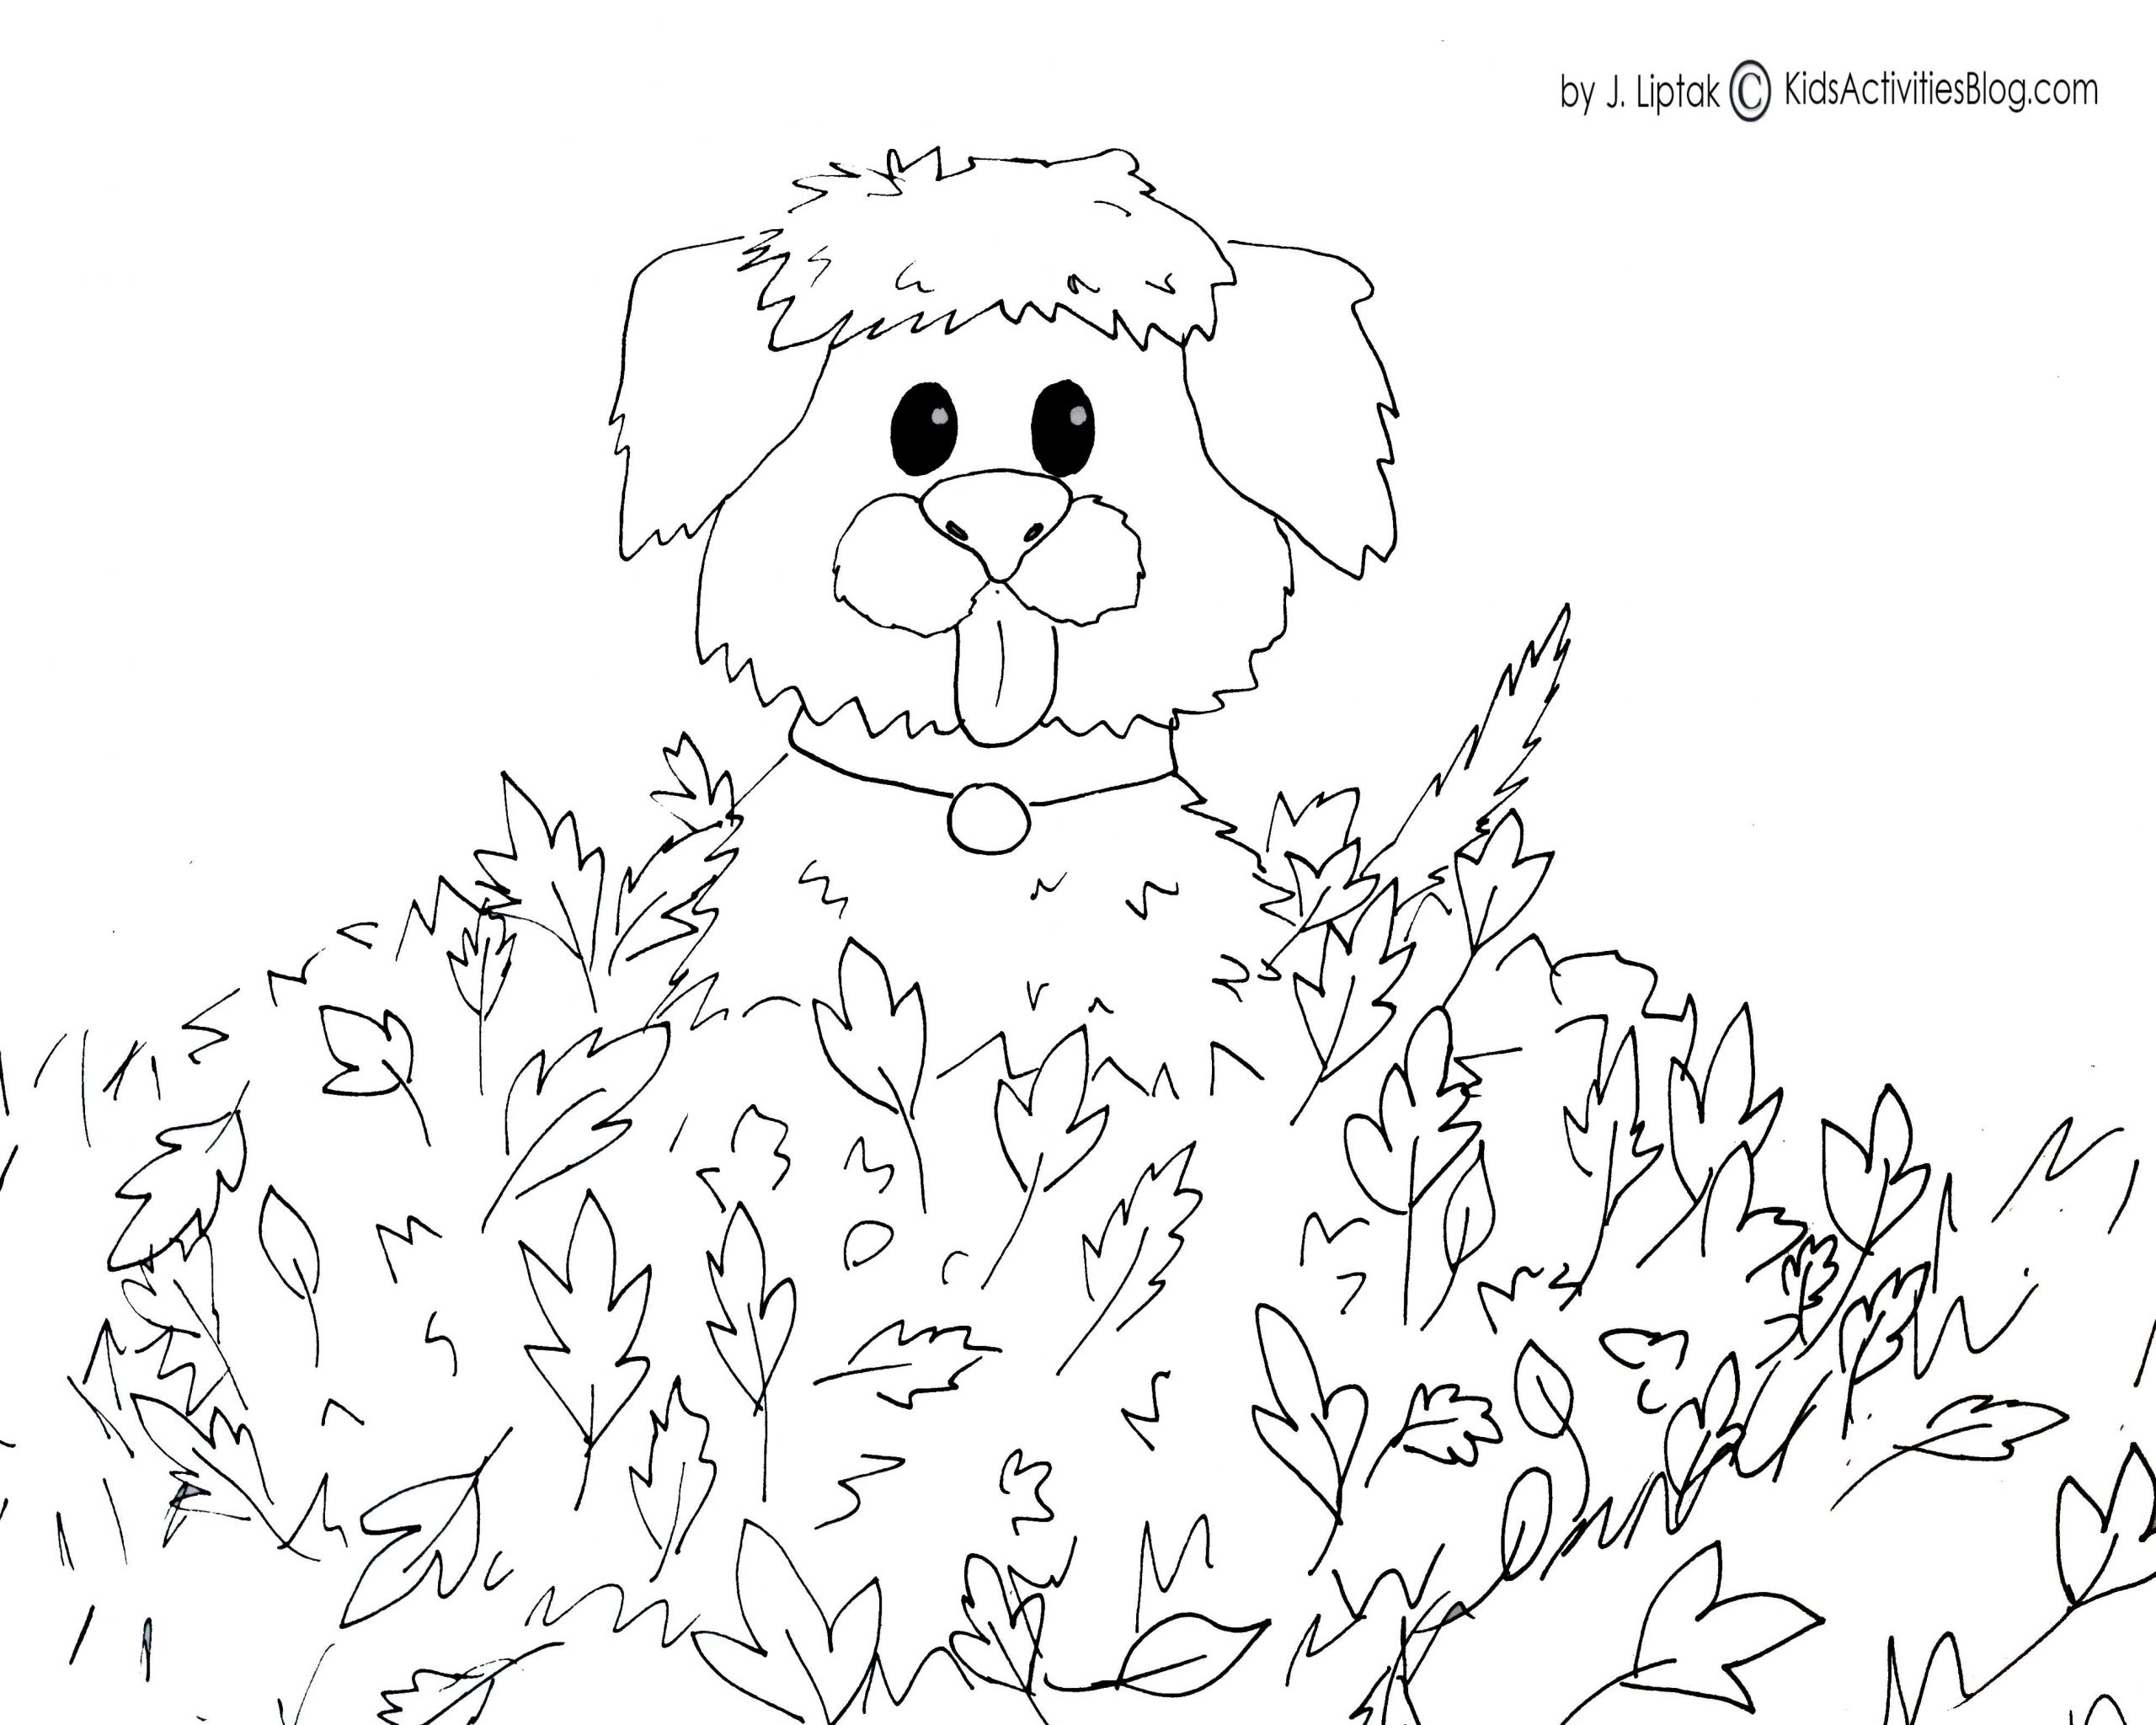 Printable Fall Coloring Pages
 4 FREE PRINTABLE FALL COLORING PAGES Kids Activities